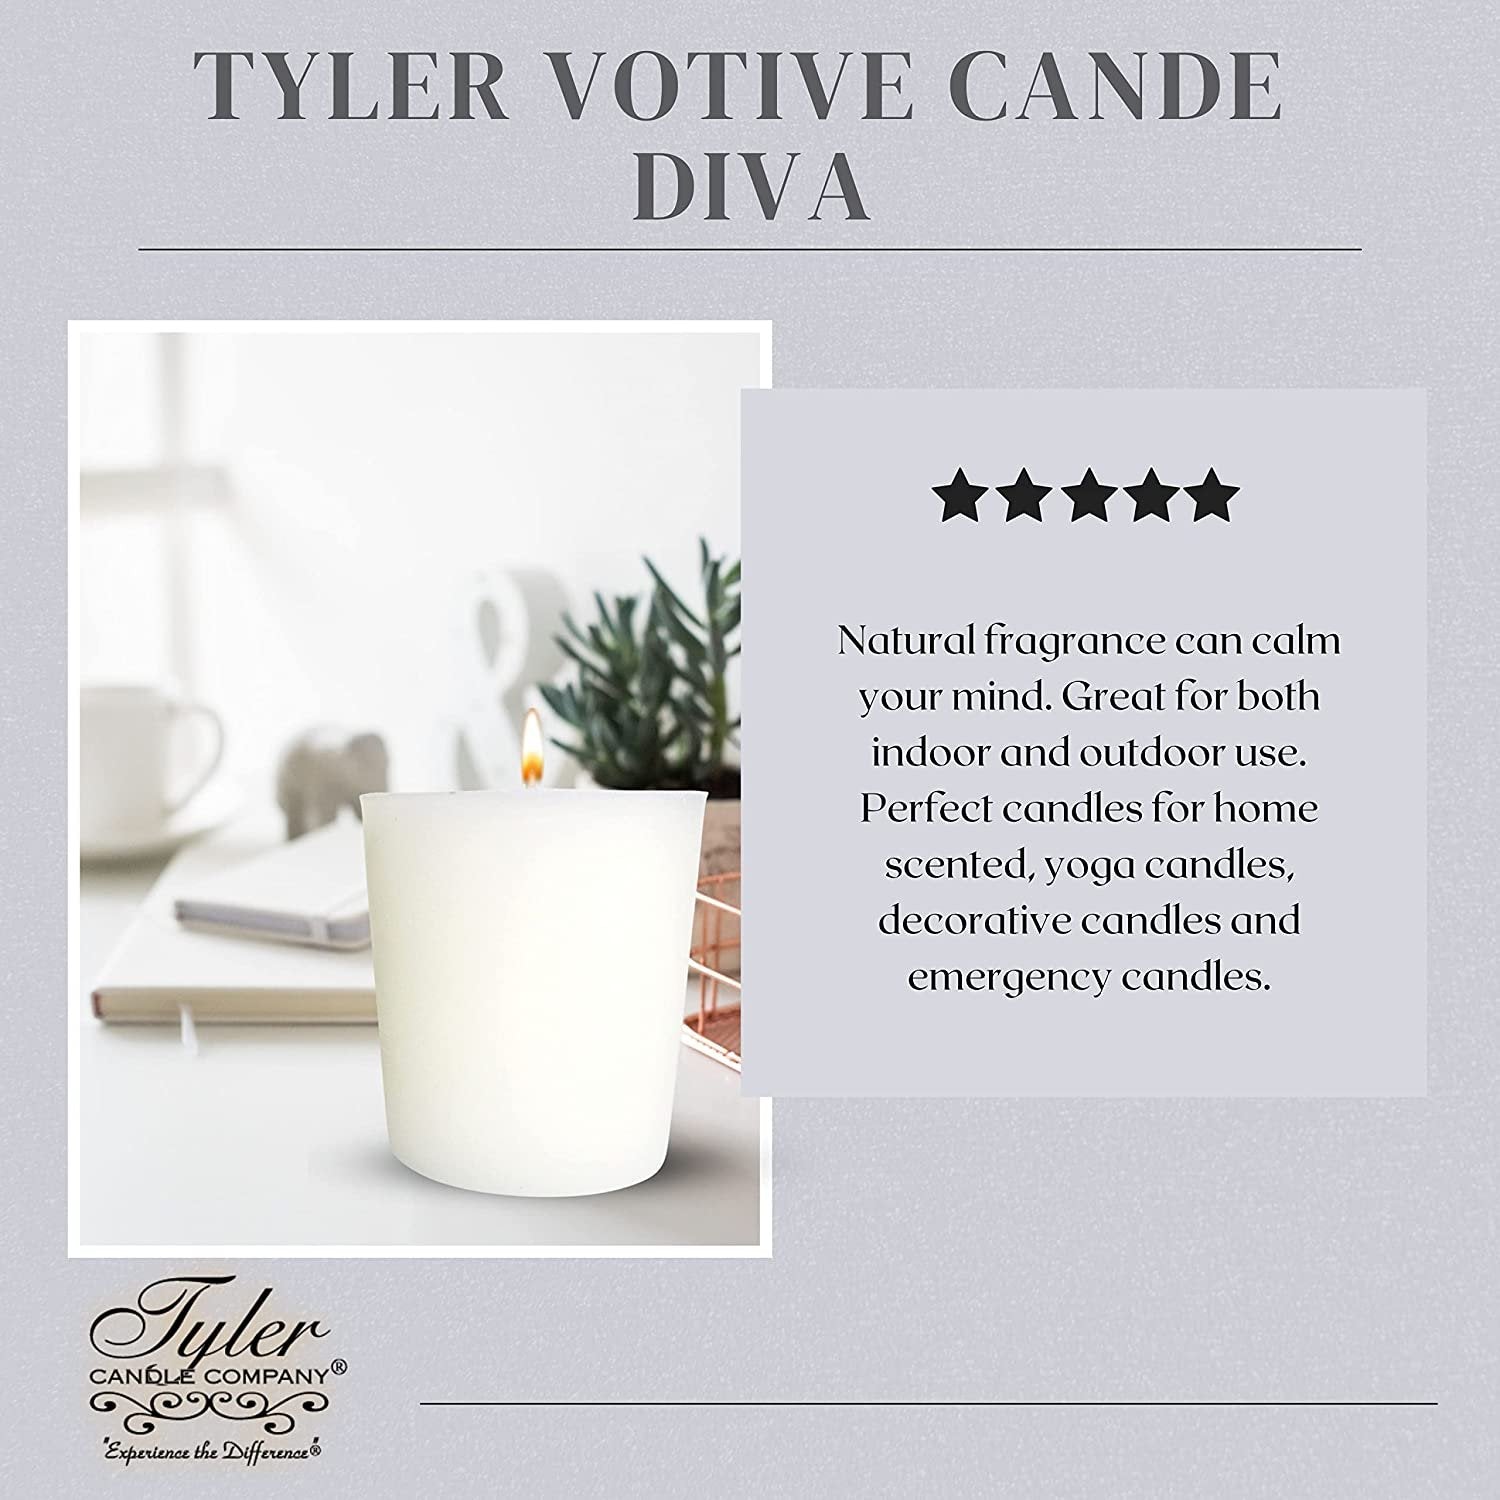 Tyler Candle Company Diva Votive Candles - Luxury Scented Candle with Essential Oils - 4 Pack of 2 oz Small Candles with 15 Hour Burn Time Each - Bonus Worldwide Nutrition Multi Purpose Key Chain